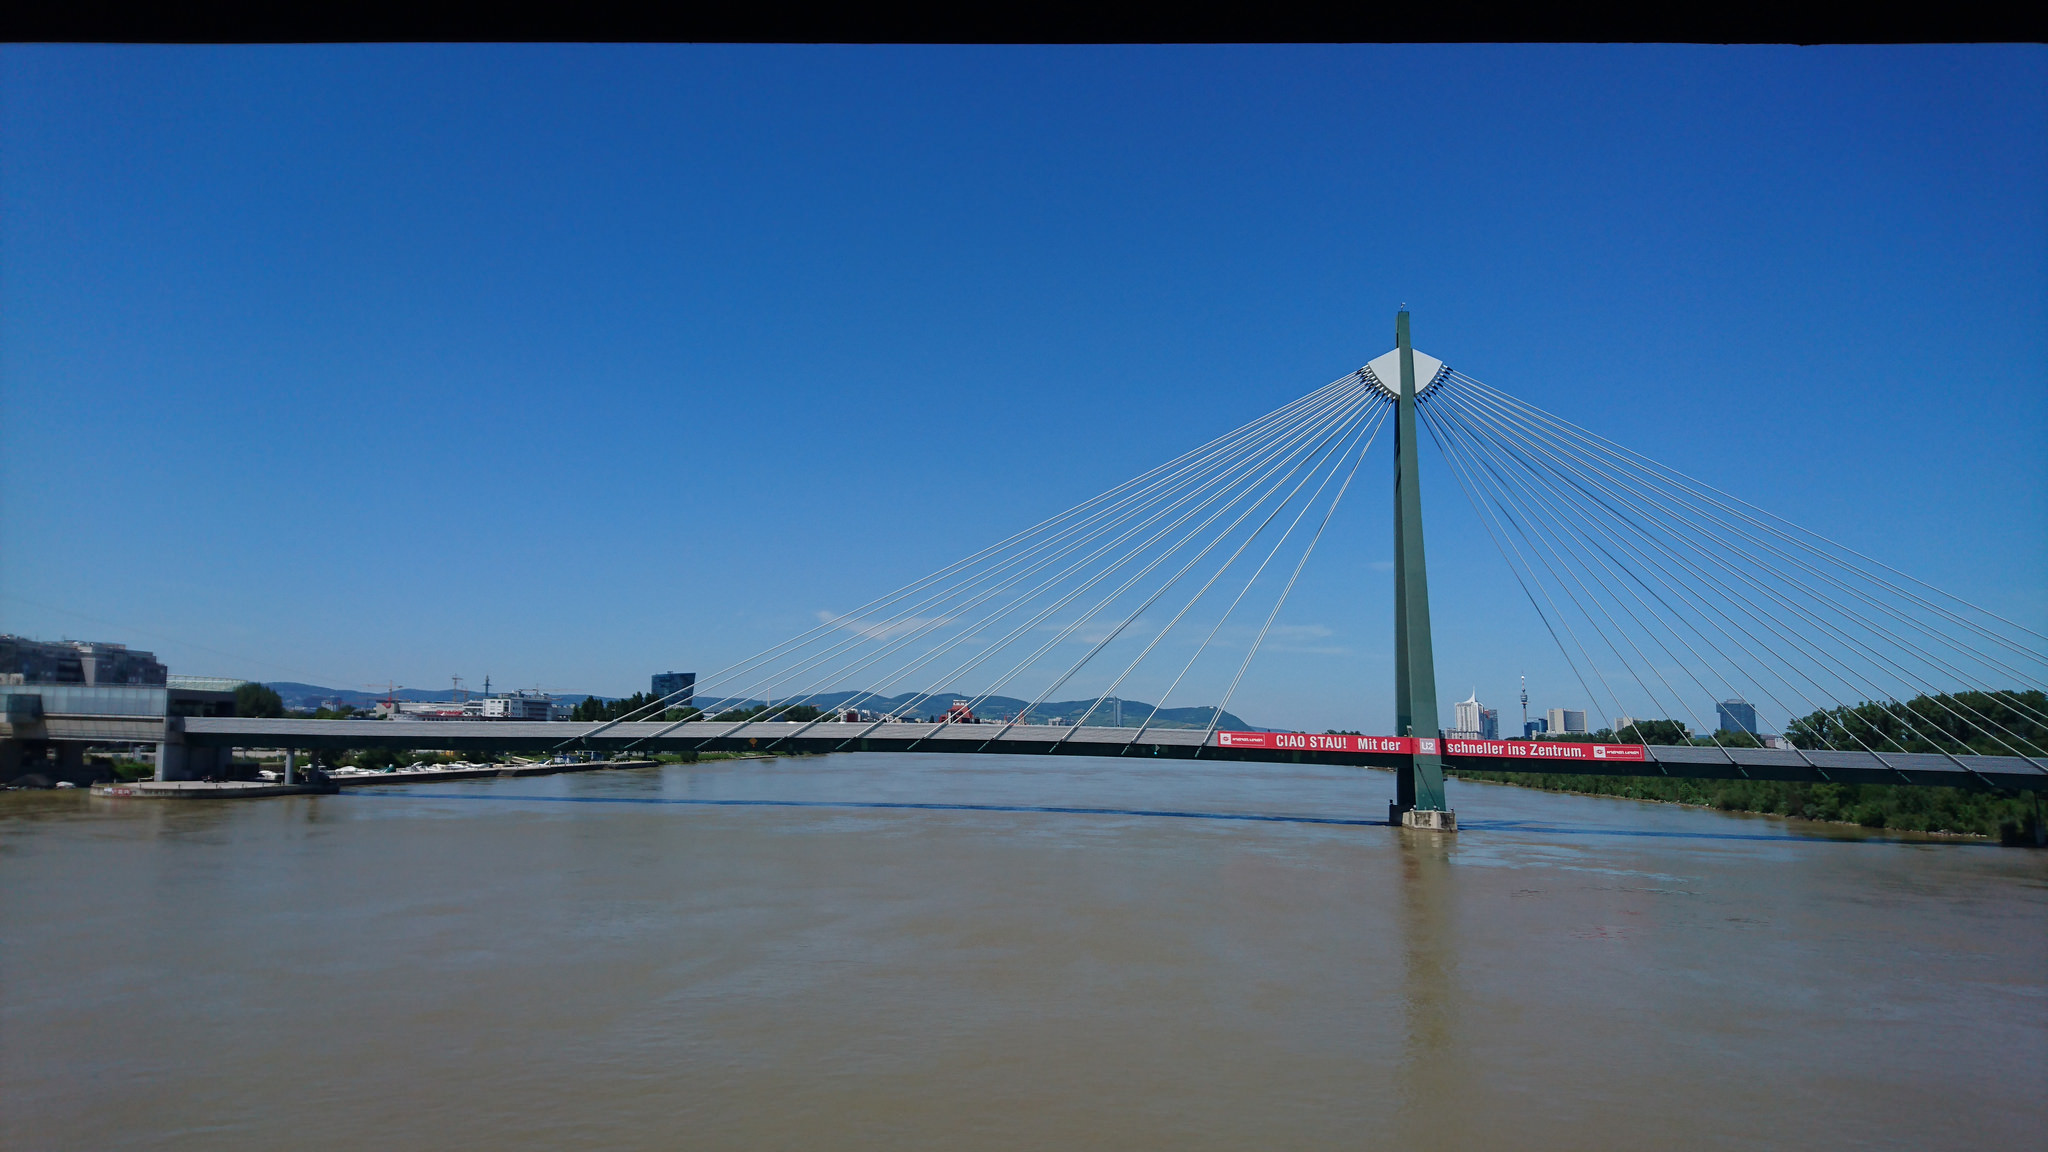 With the River Danube passing through the city, there are many bridges. 